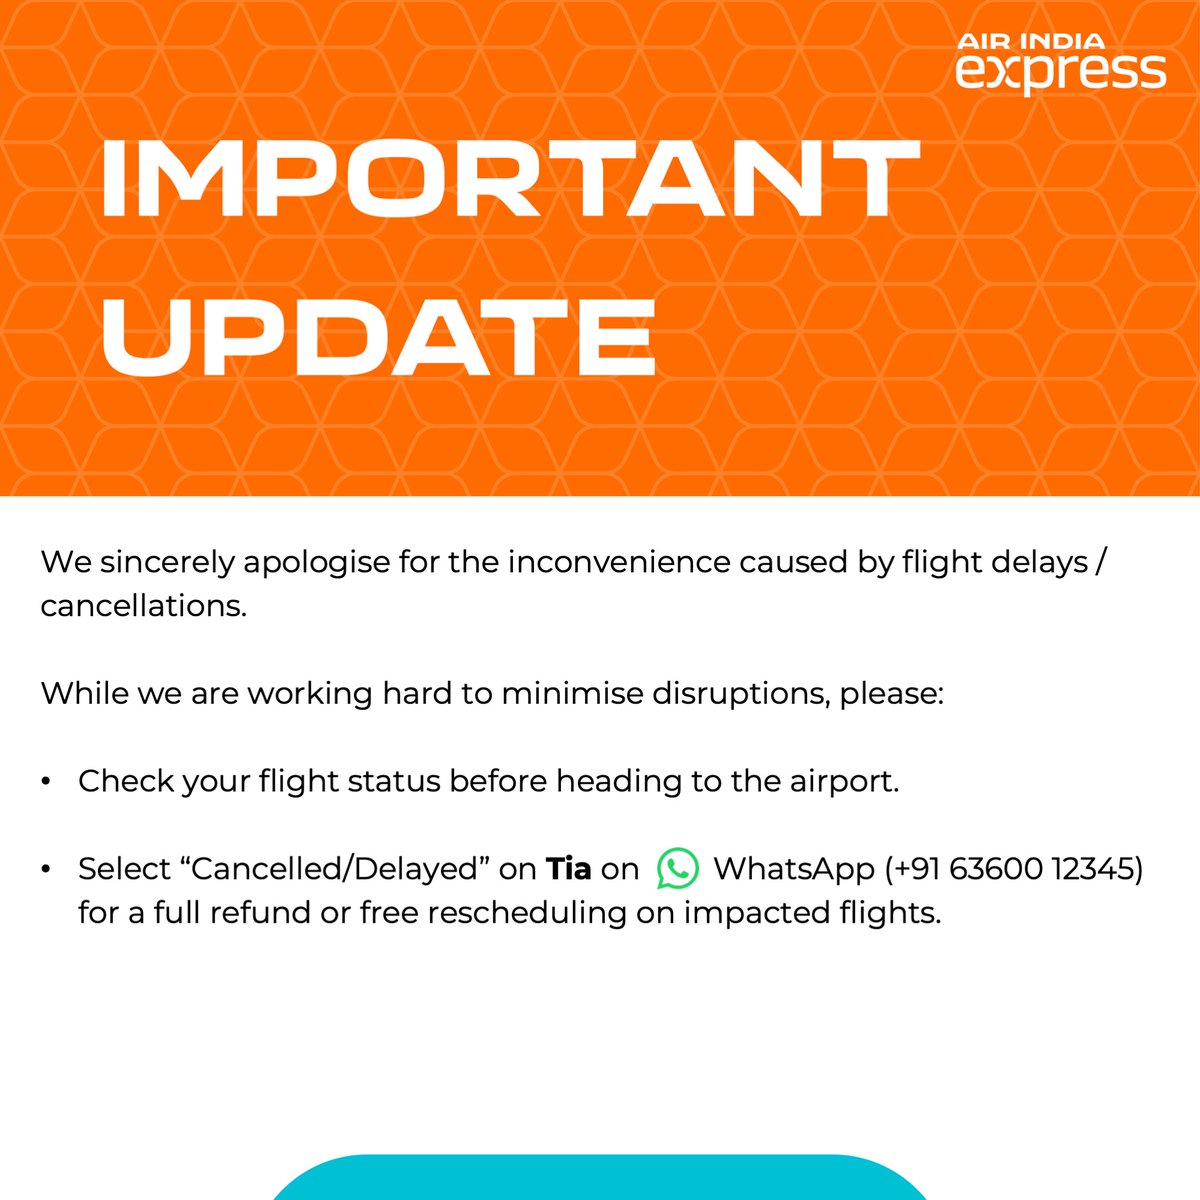 #ImportantUpdate We sincerely apologise for the inconvenience caused by unprecedented flight delays and cancellations. While we are working hard to minimise disruptions, please check your flight status before heading to the airport. If your flight is impacted, please reach out